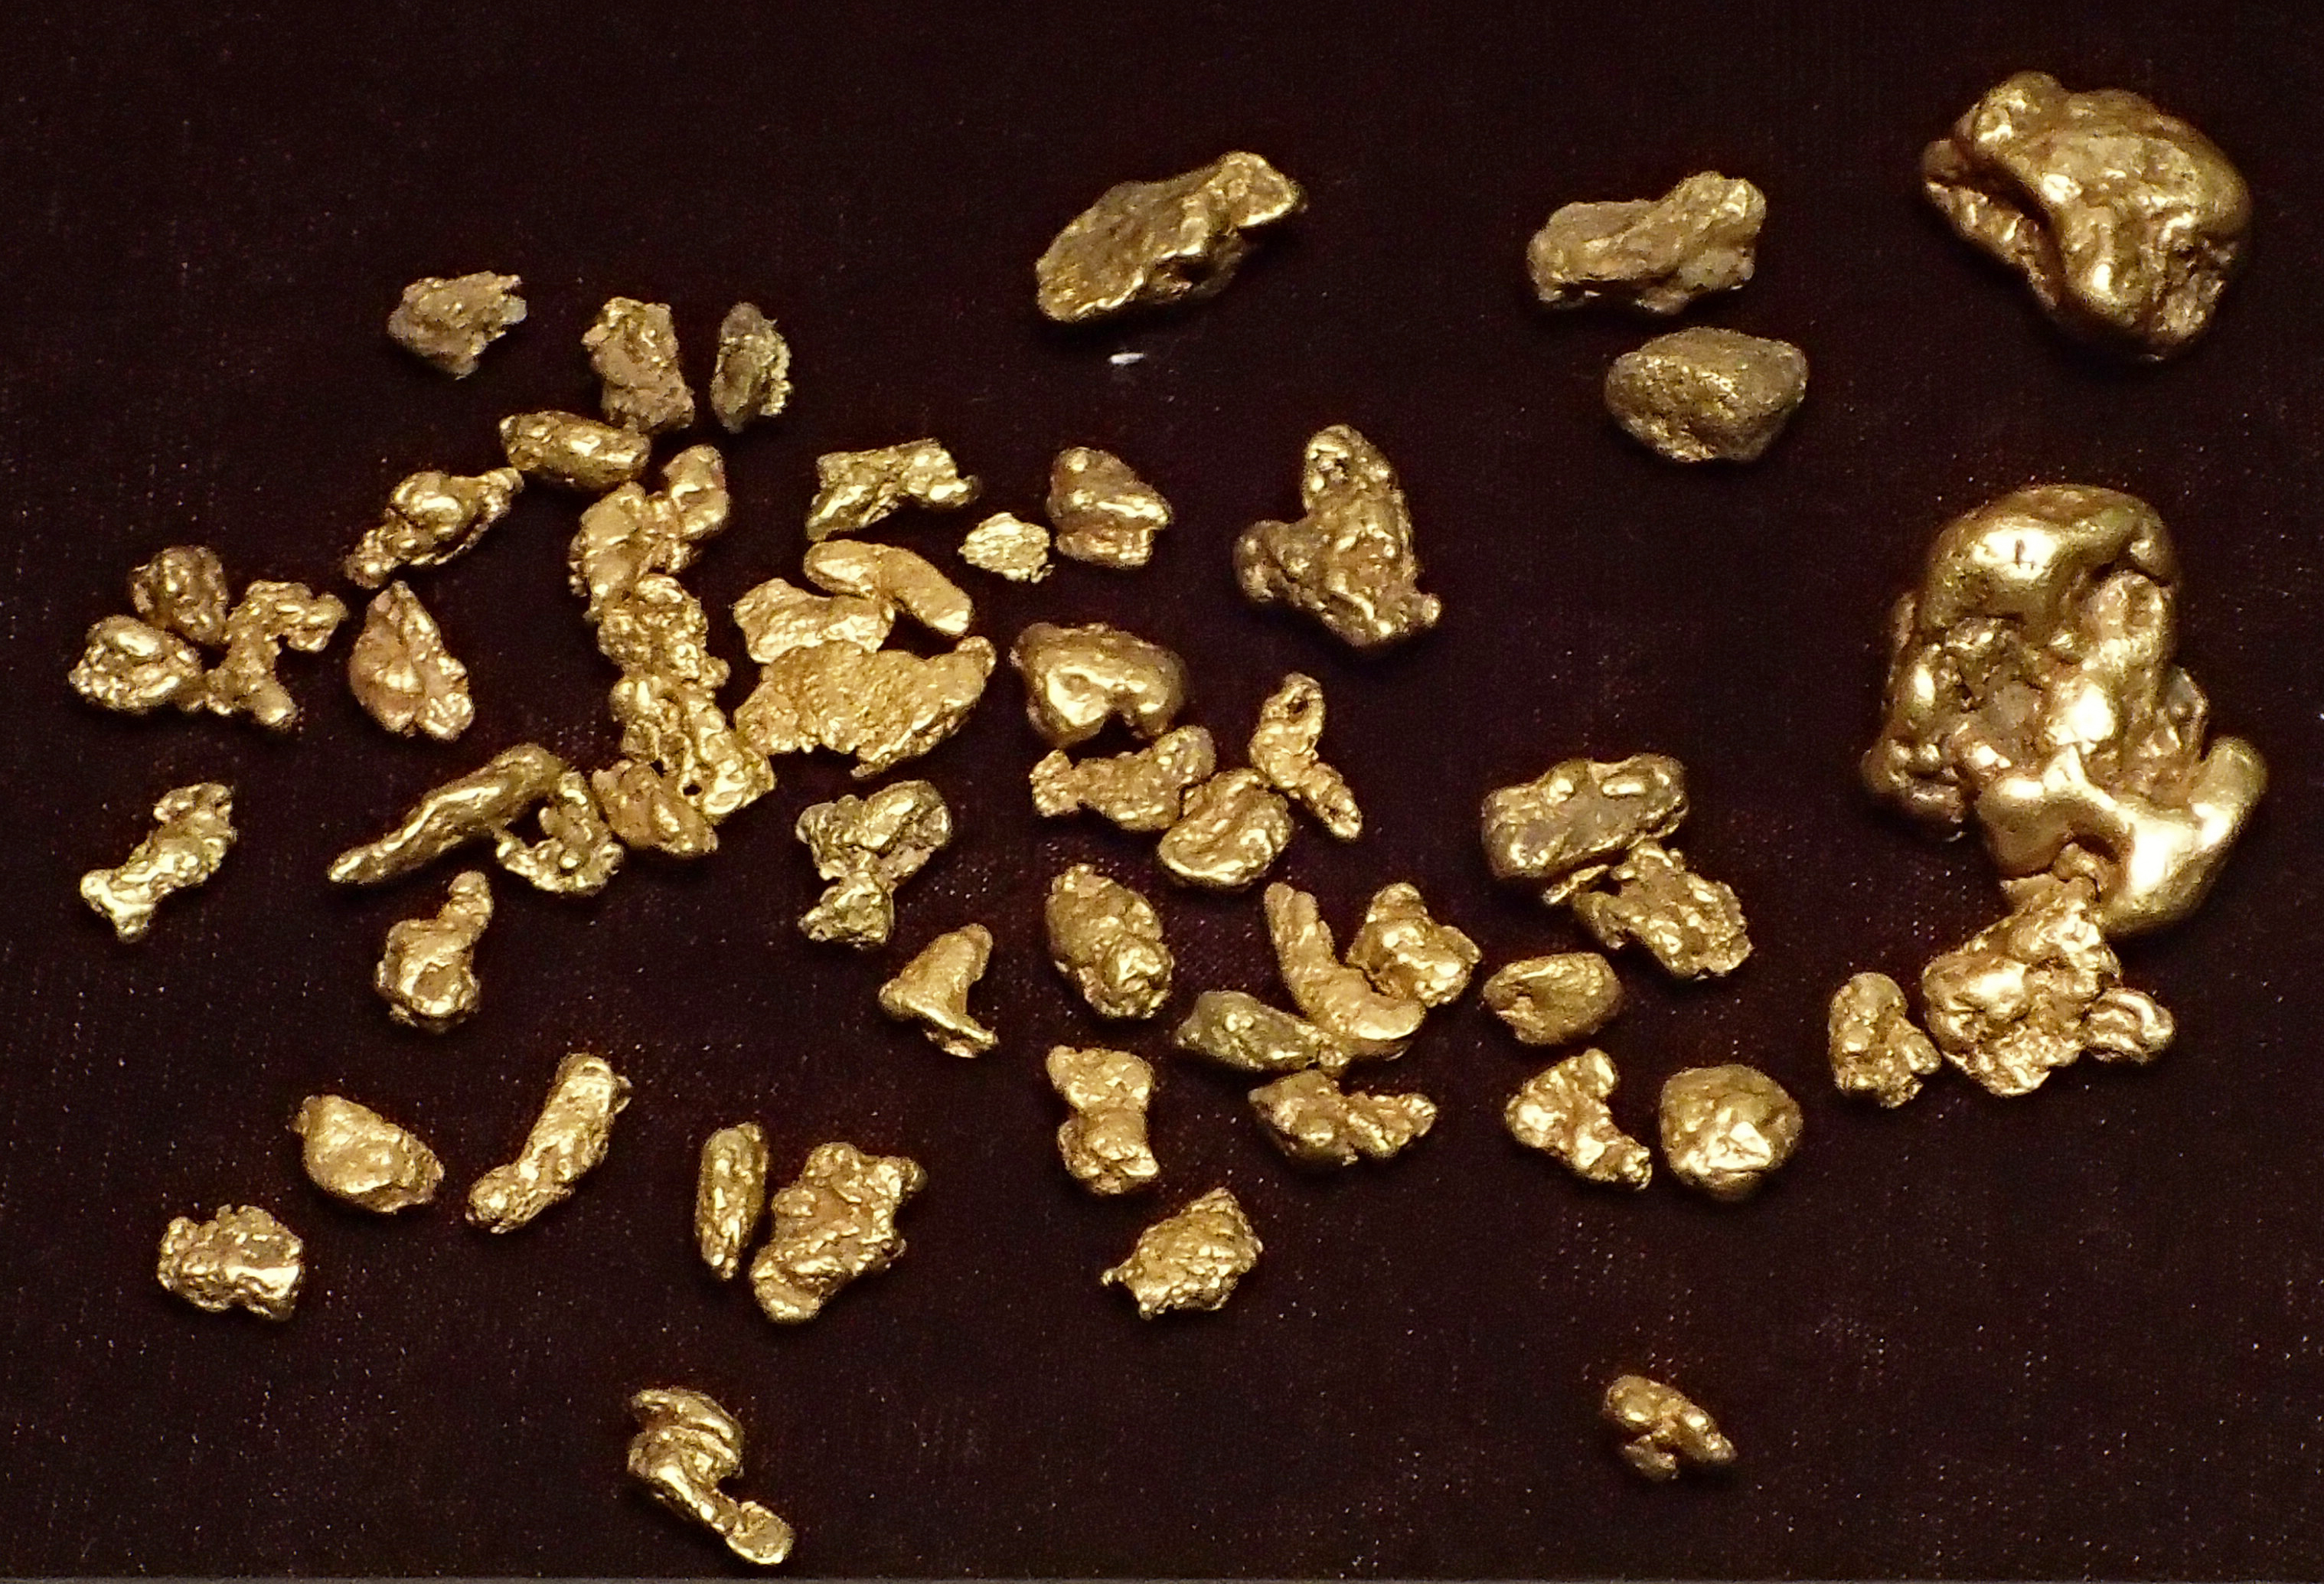 File:Gold nuggets (placer gold) (Cache Creek, near Granite, Chaffee County,  Colorado, USA) 3 (16884639690).jpg - Wikimedia Commons